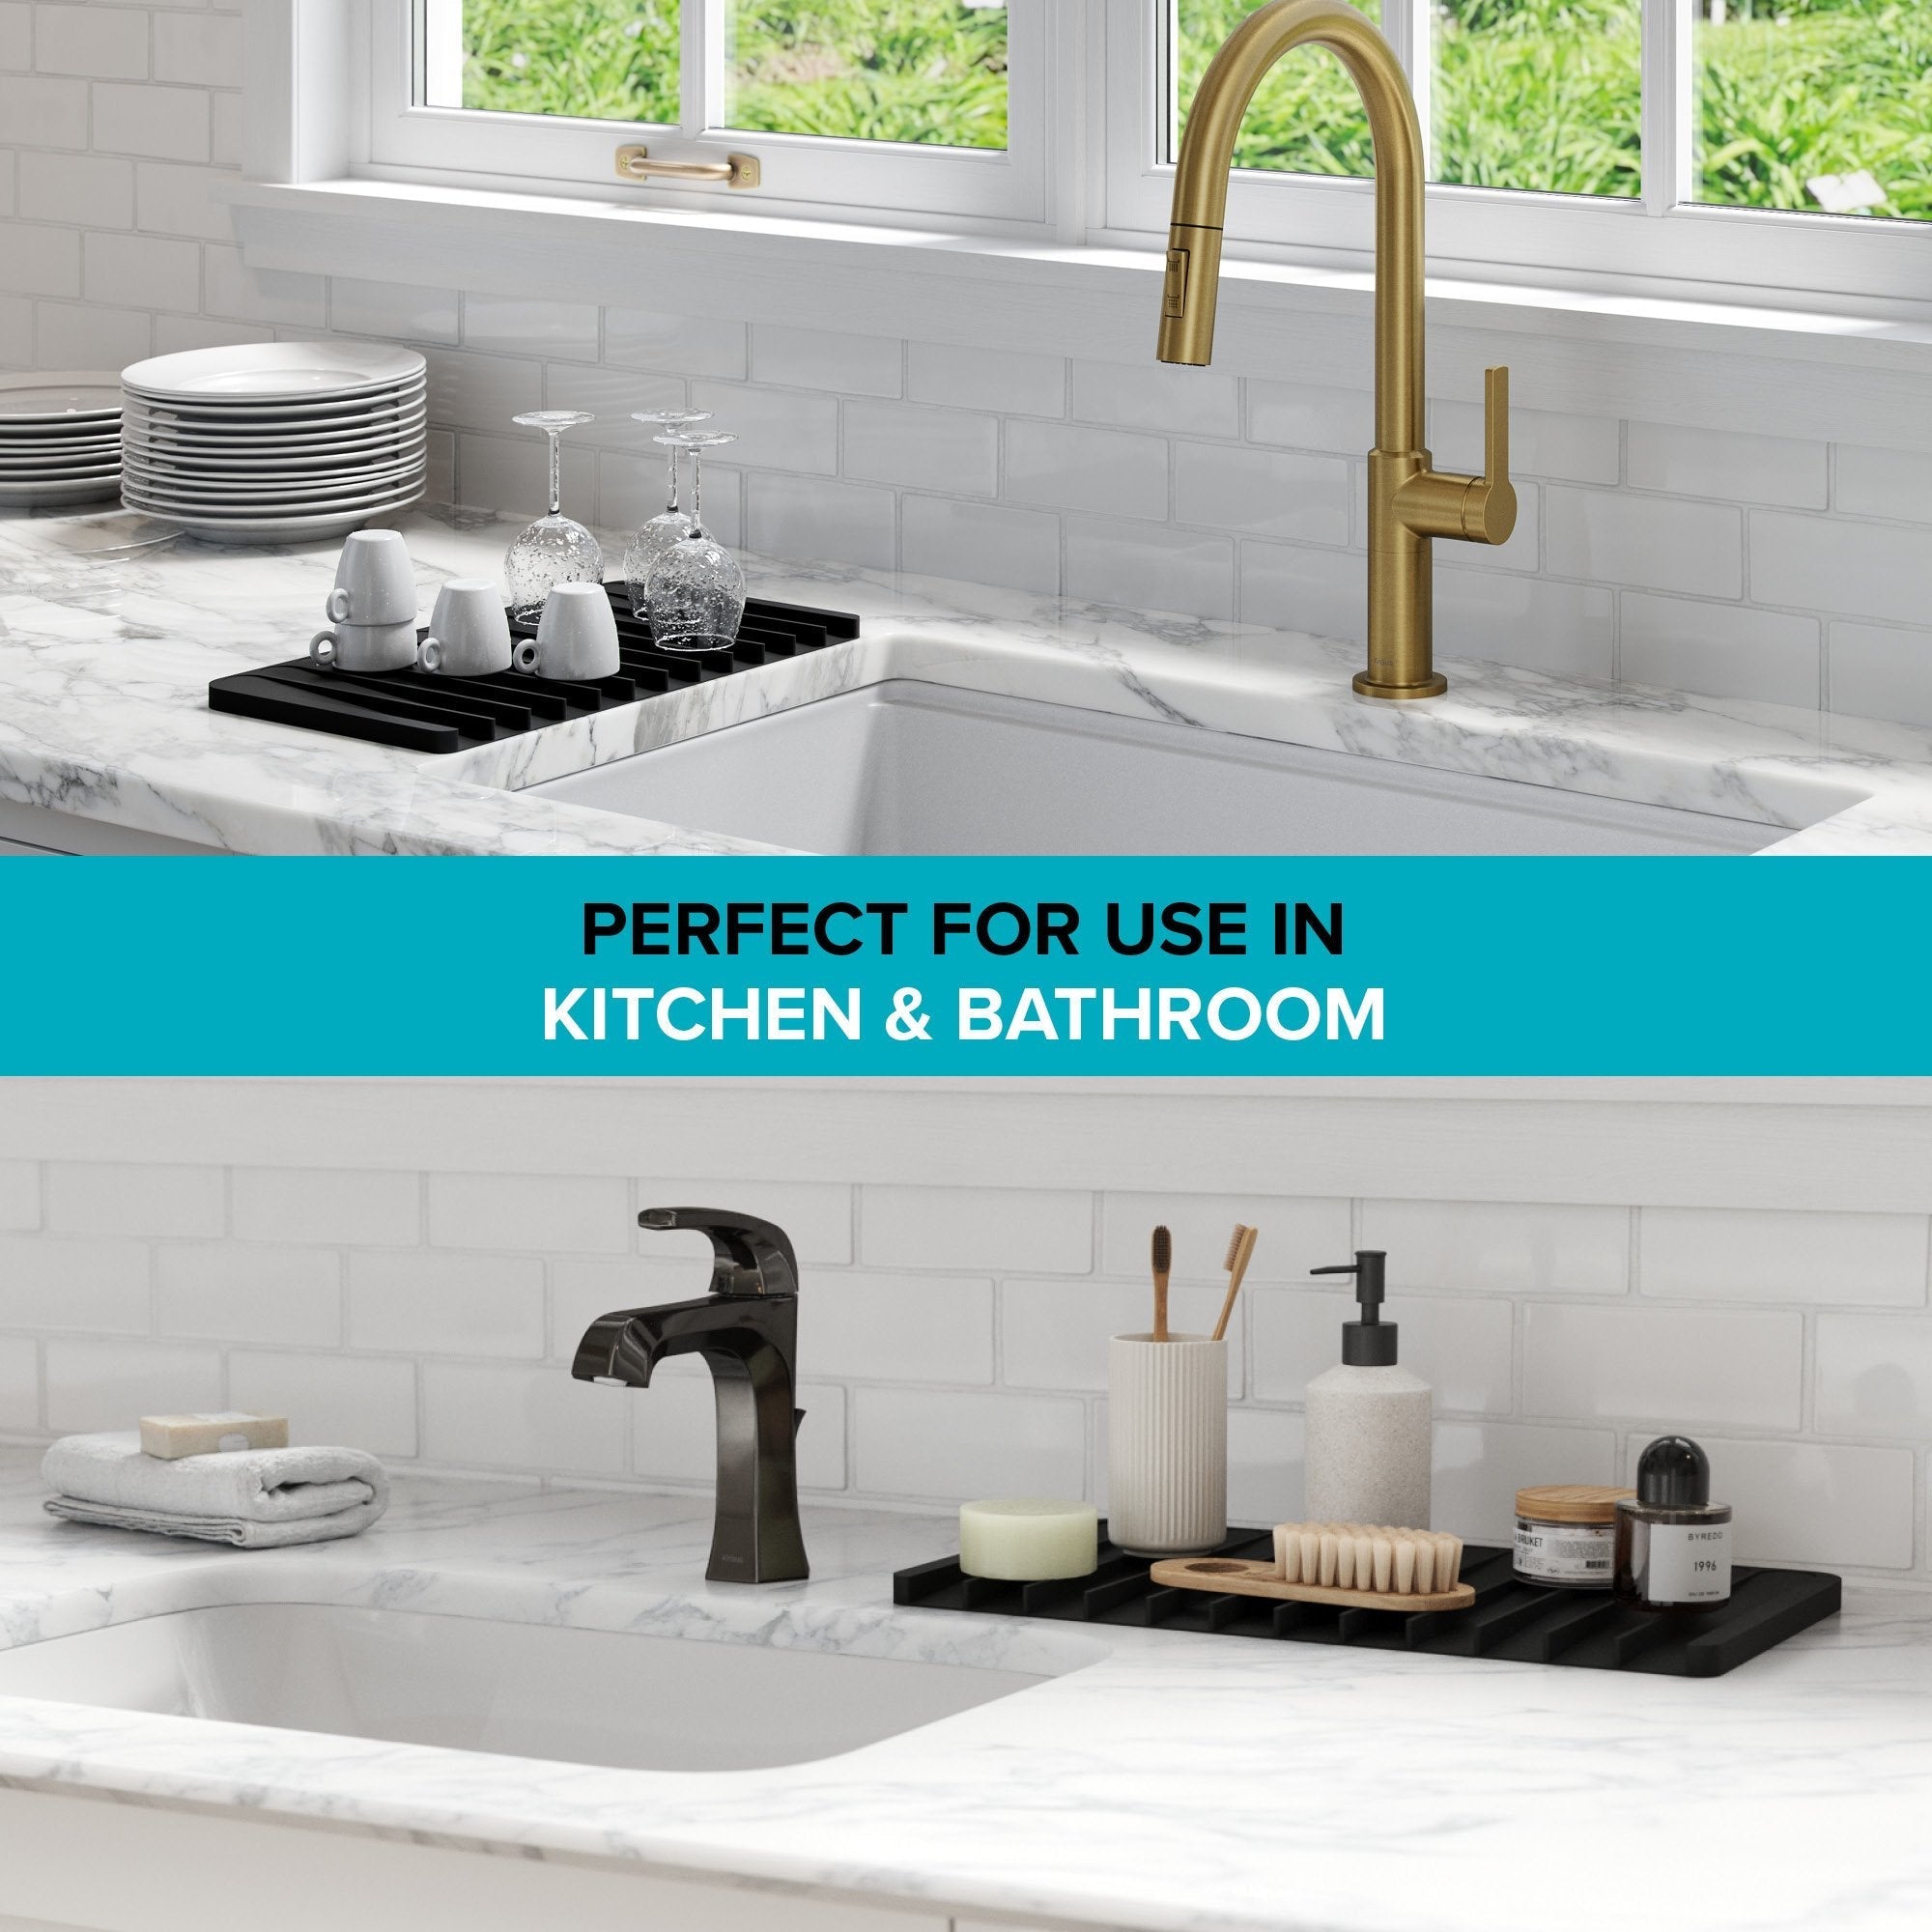 Silicone Kitchen Sink Faucet Mat - Protects Countertops And